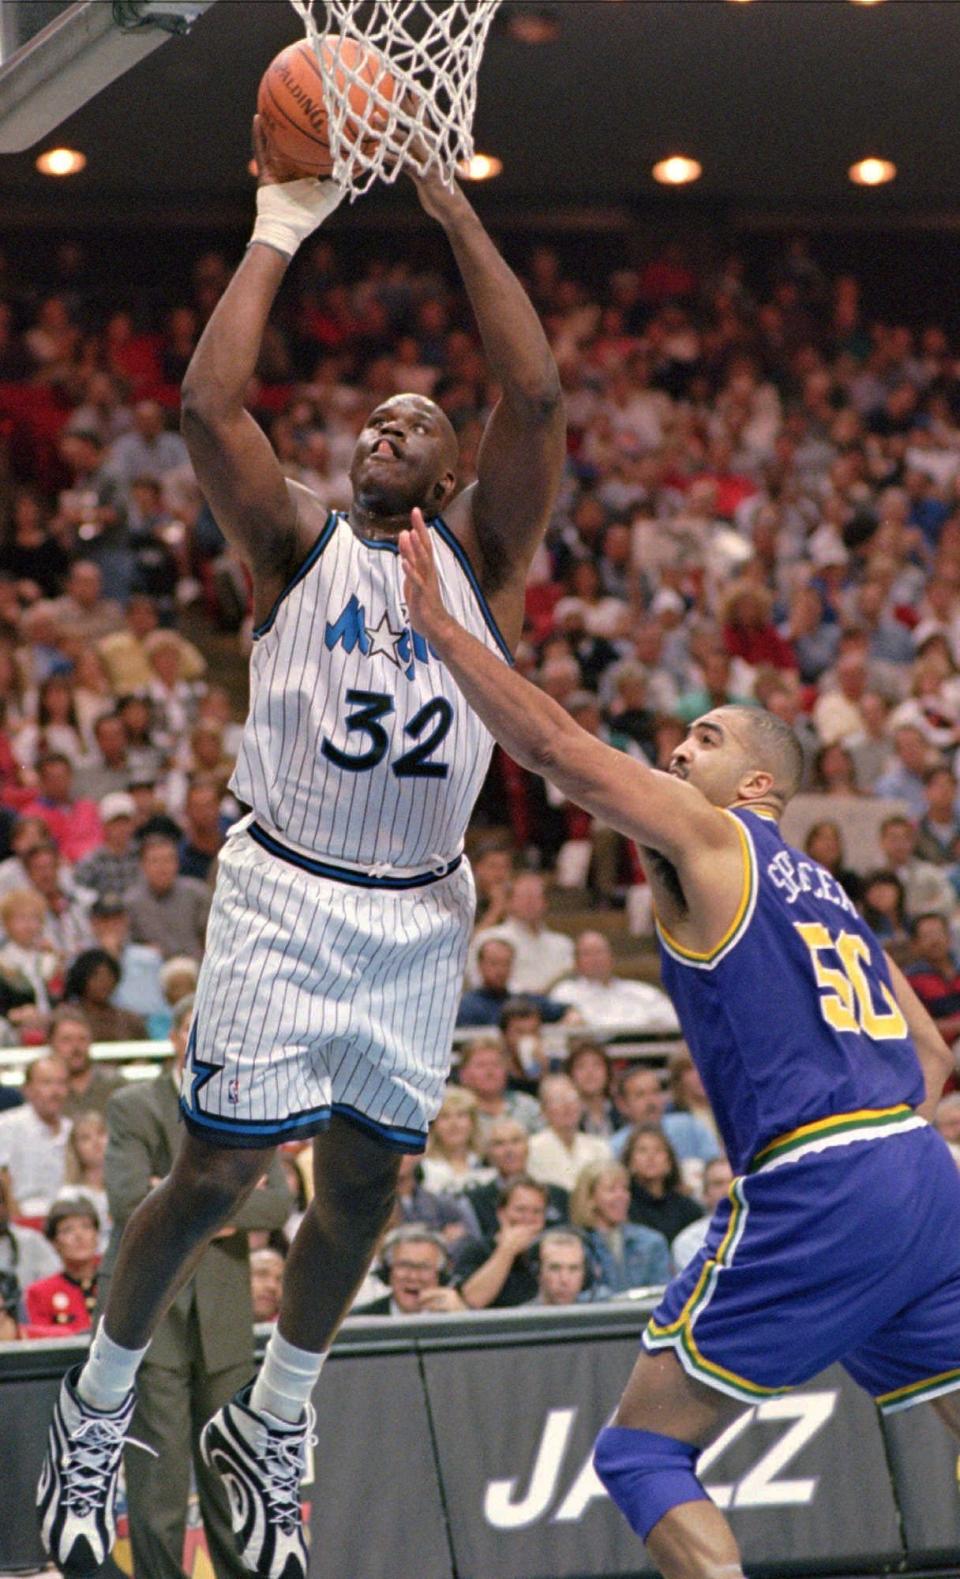 After being selected No. 1 in the 1992 NBA Draft, Orlando center Shaquille O'Neal (32) immediately transformed the Magic from the second-worst team in the NBA to a 41-41 team that barely missed the playoffs. Two years later they were playing in the NBA Finals.